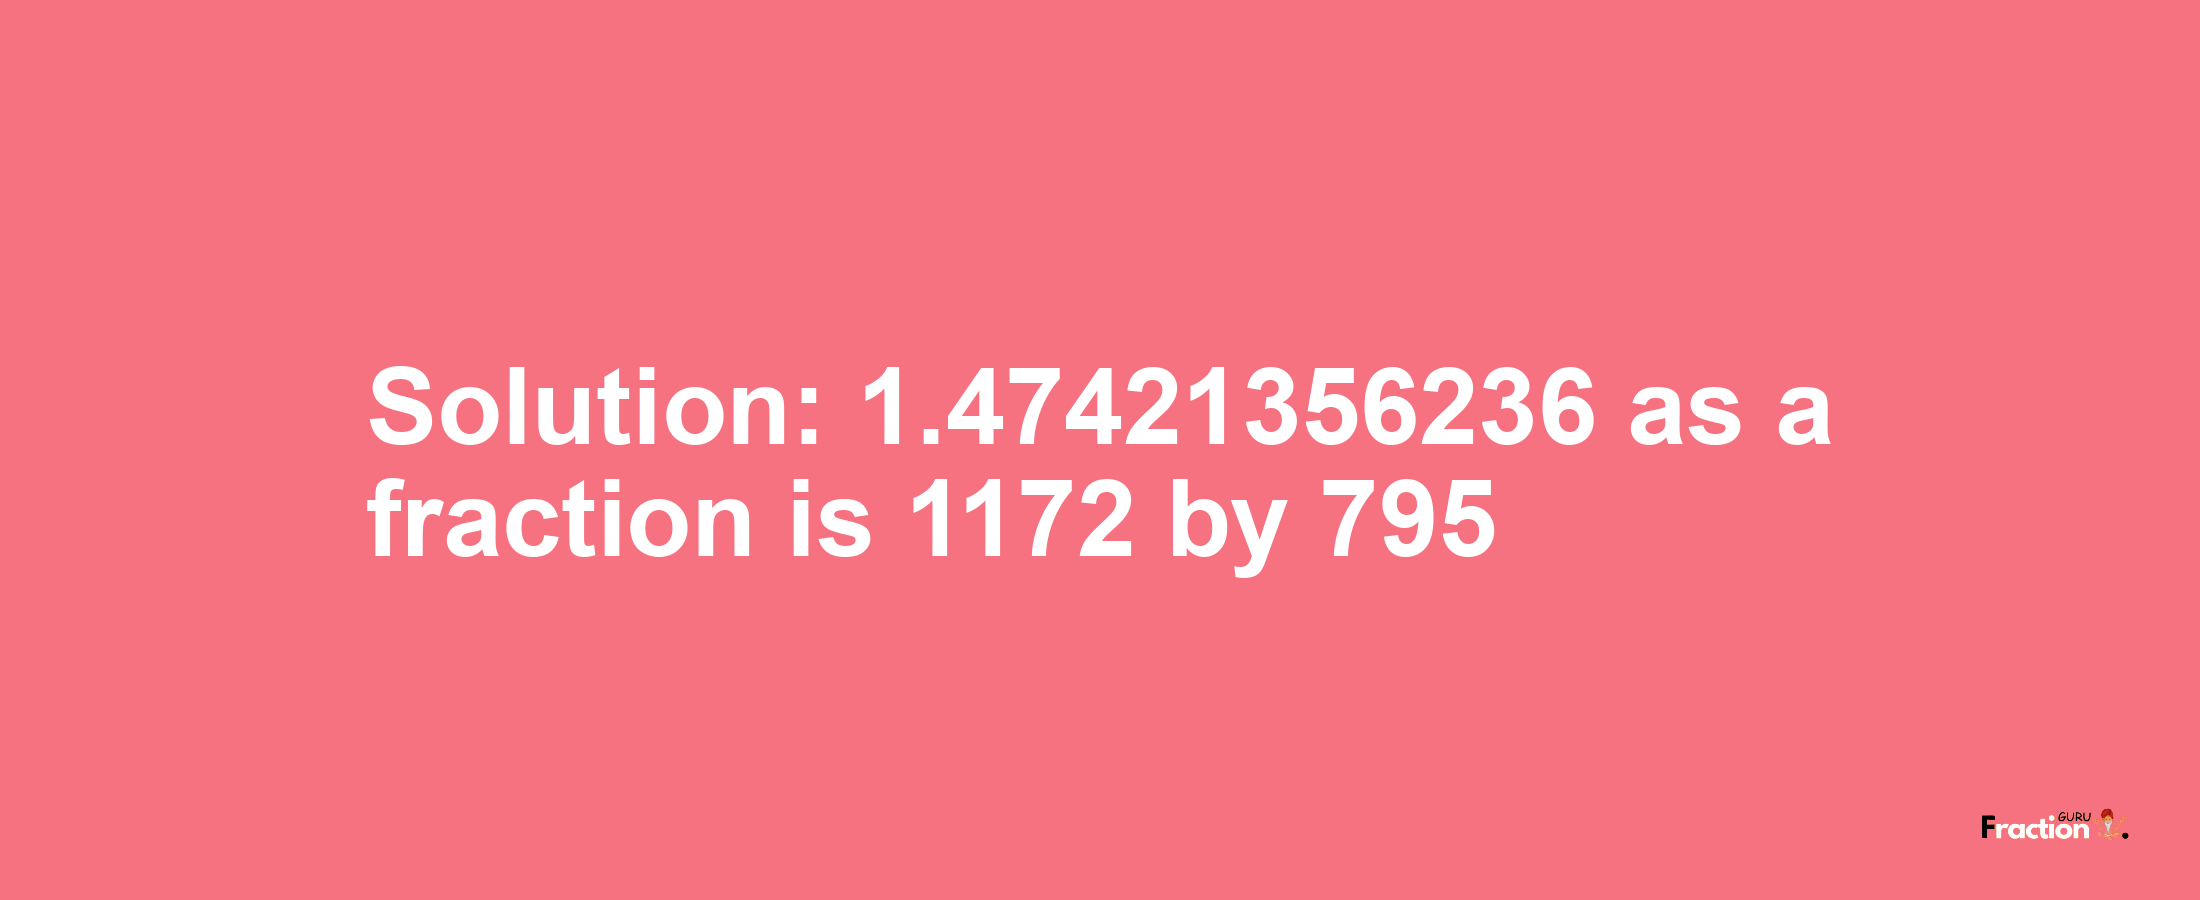 Solution:1.47421356236 as a fraction is 1172/795